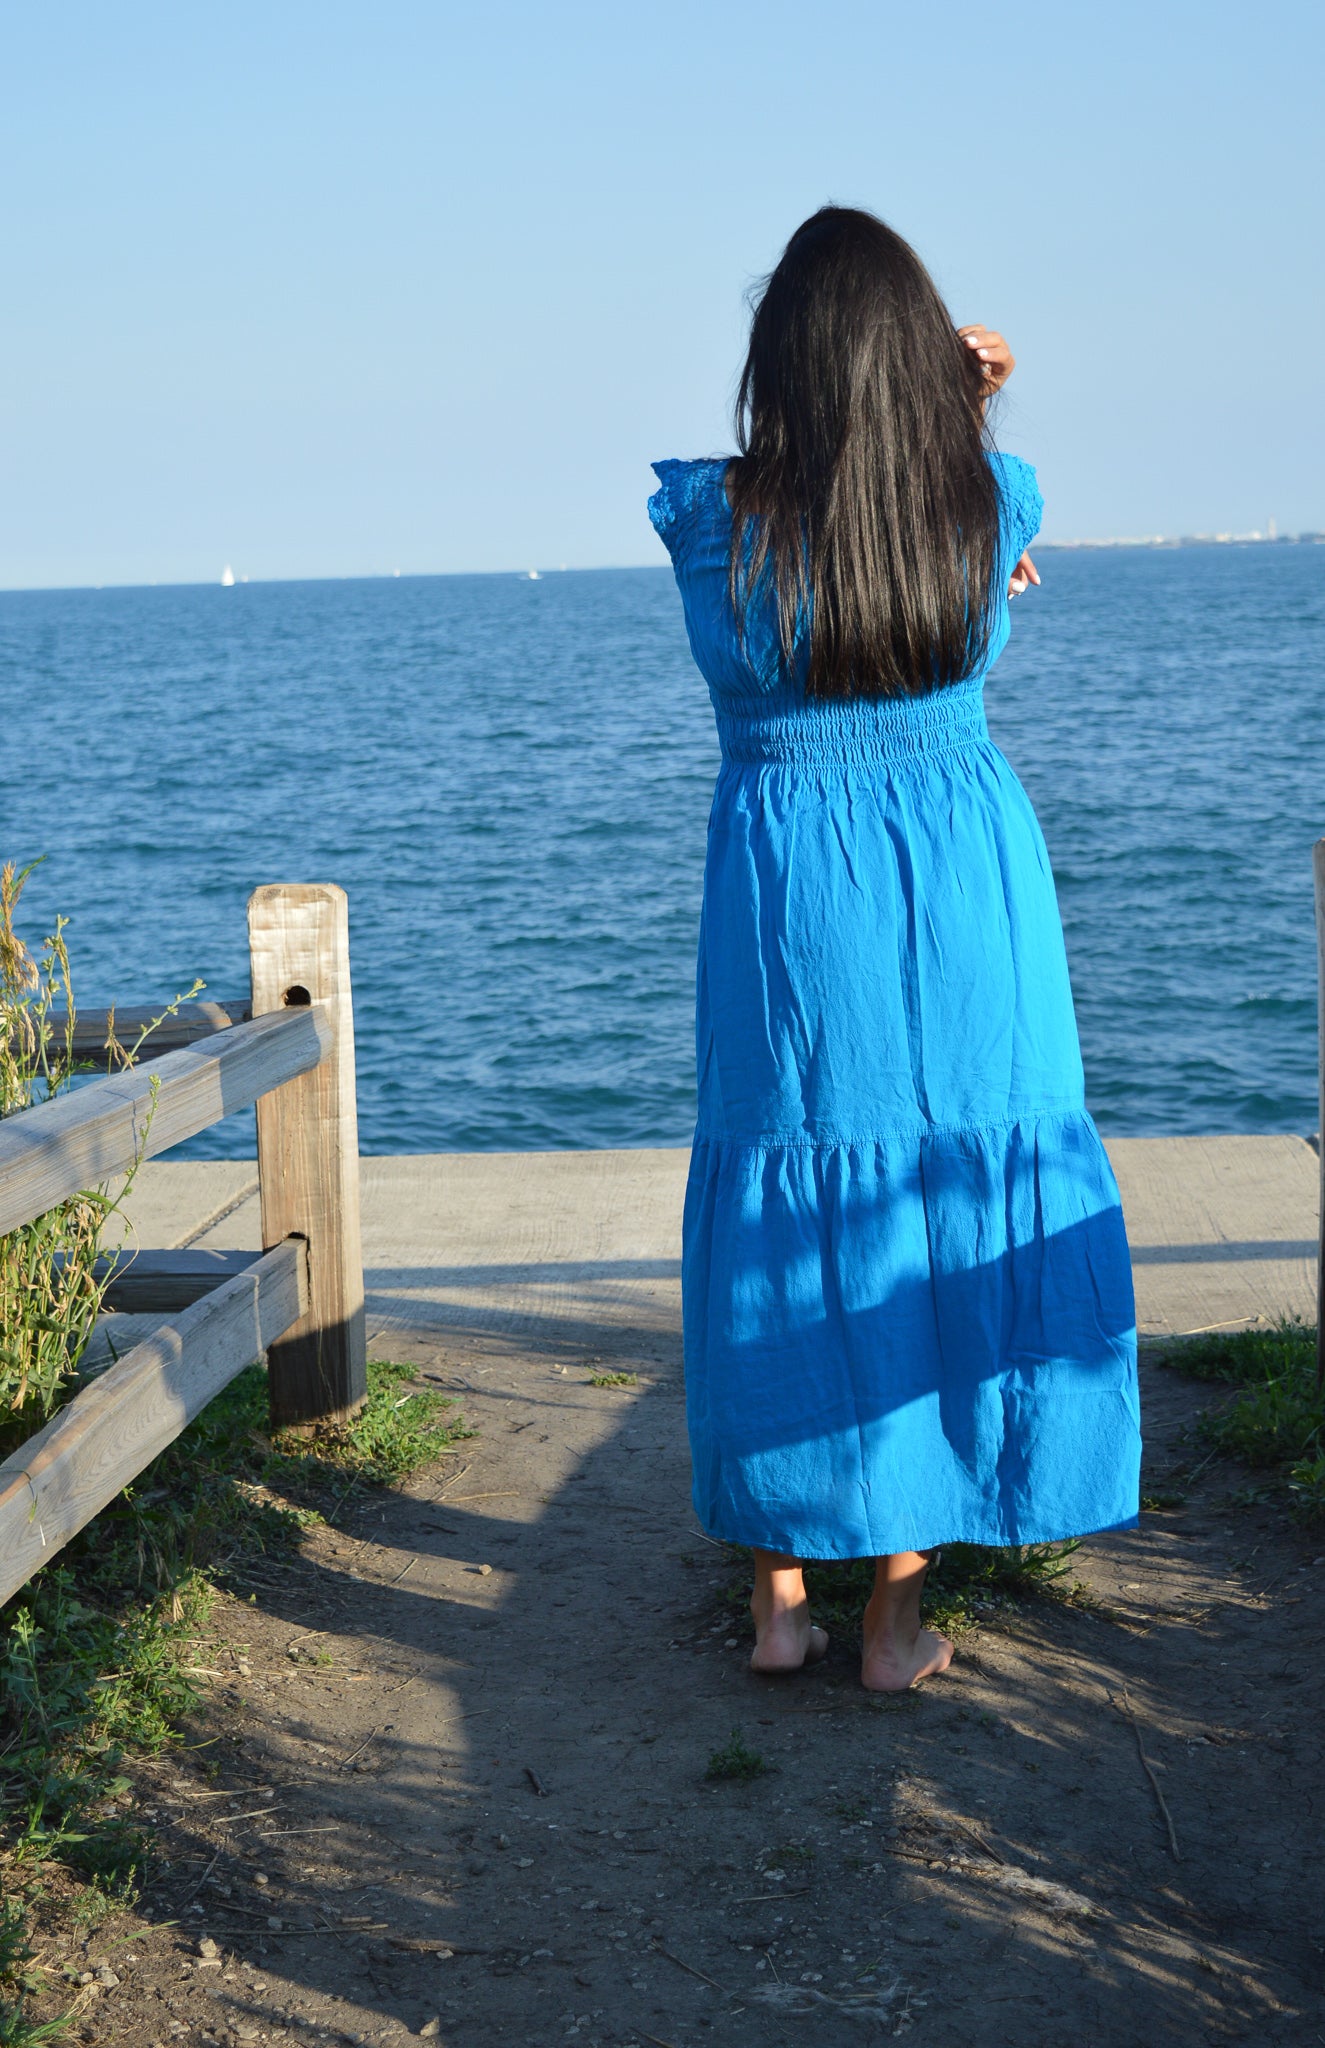 Woman wearing blue cotton dresss at chicago lake front. Sunny